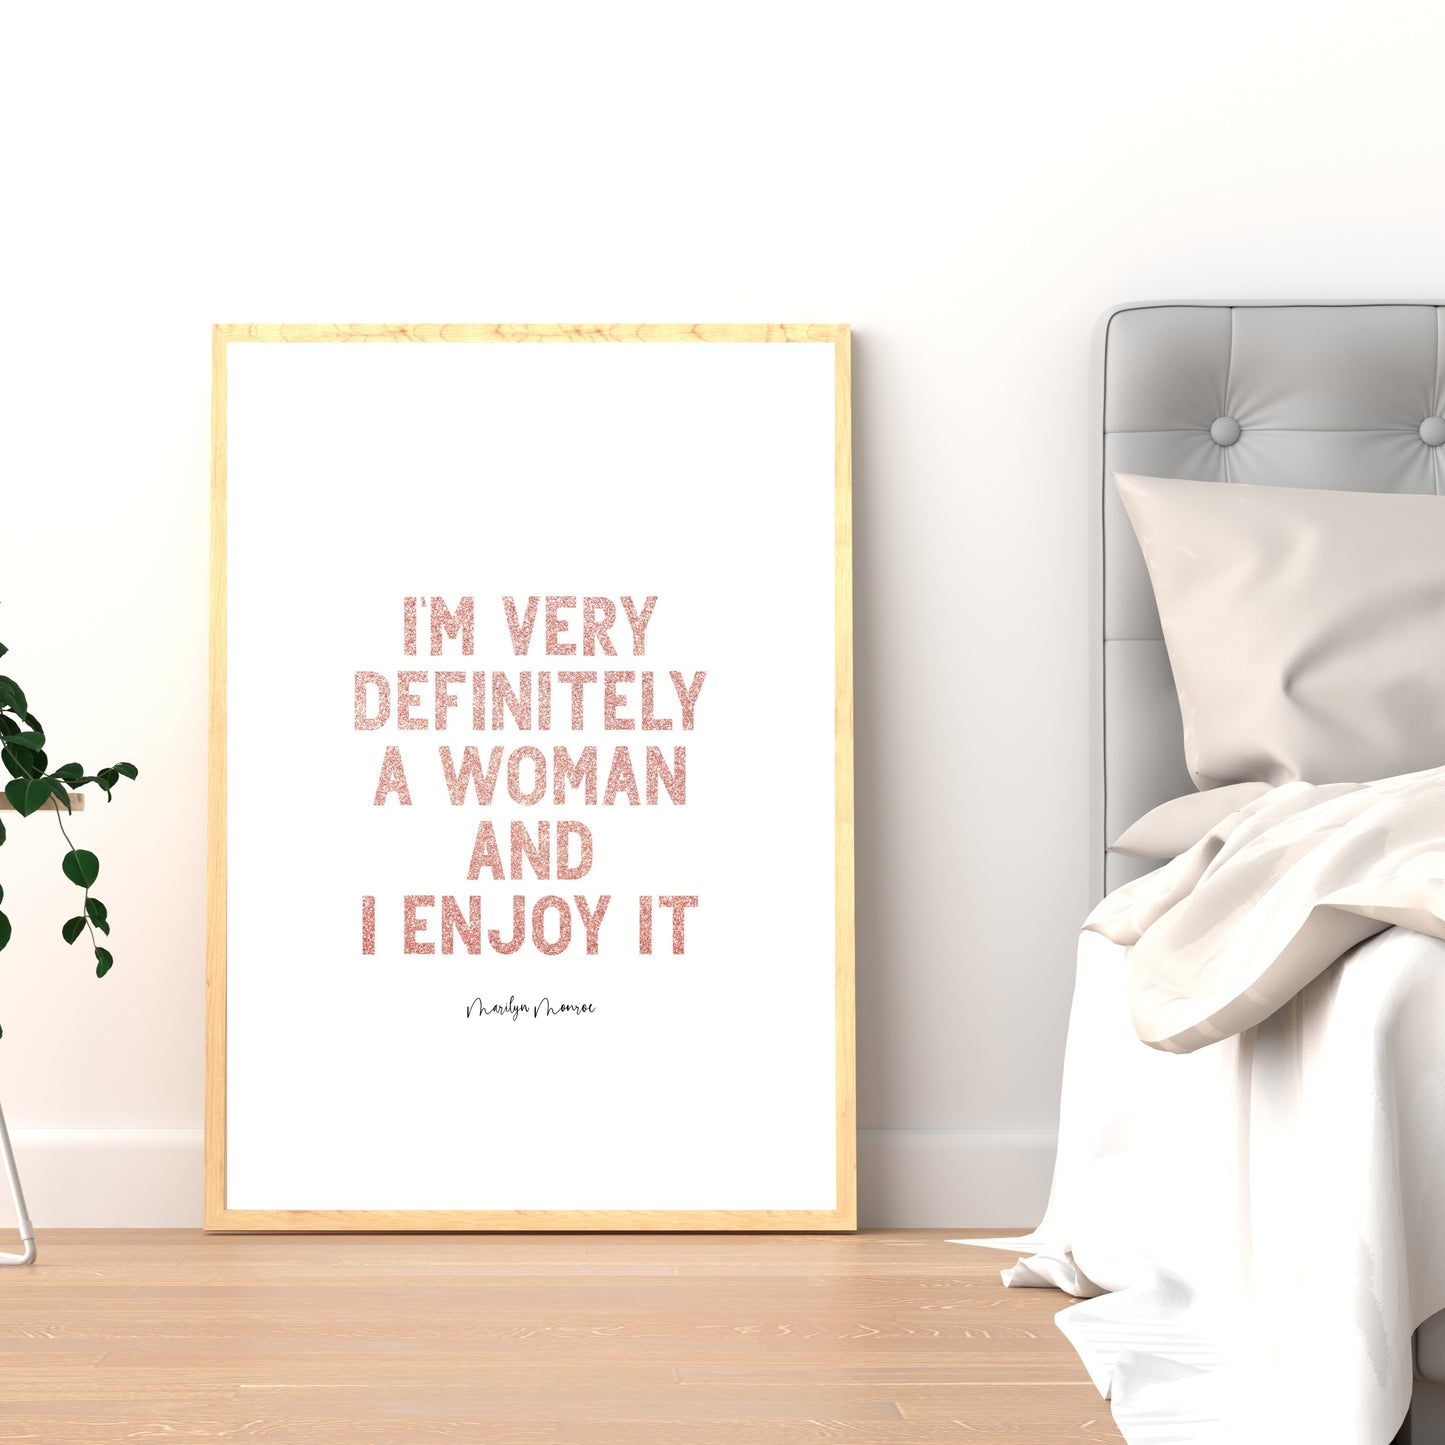 "I'm Very Definitely A Woman And I Enjoy It" Famous Quote by Marilyn Monroe, Printable Art